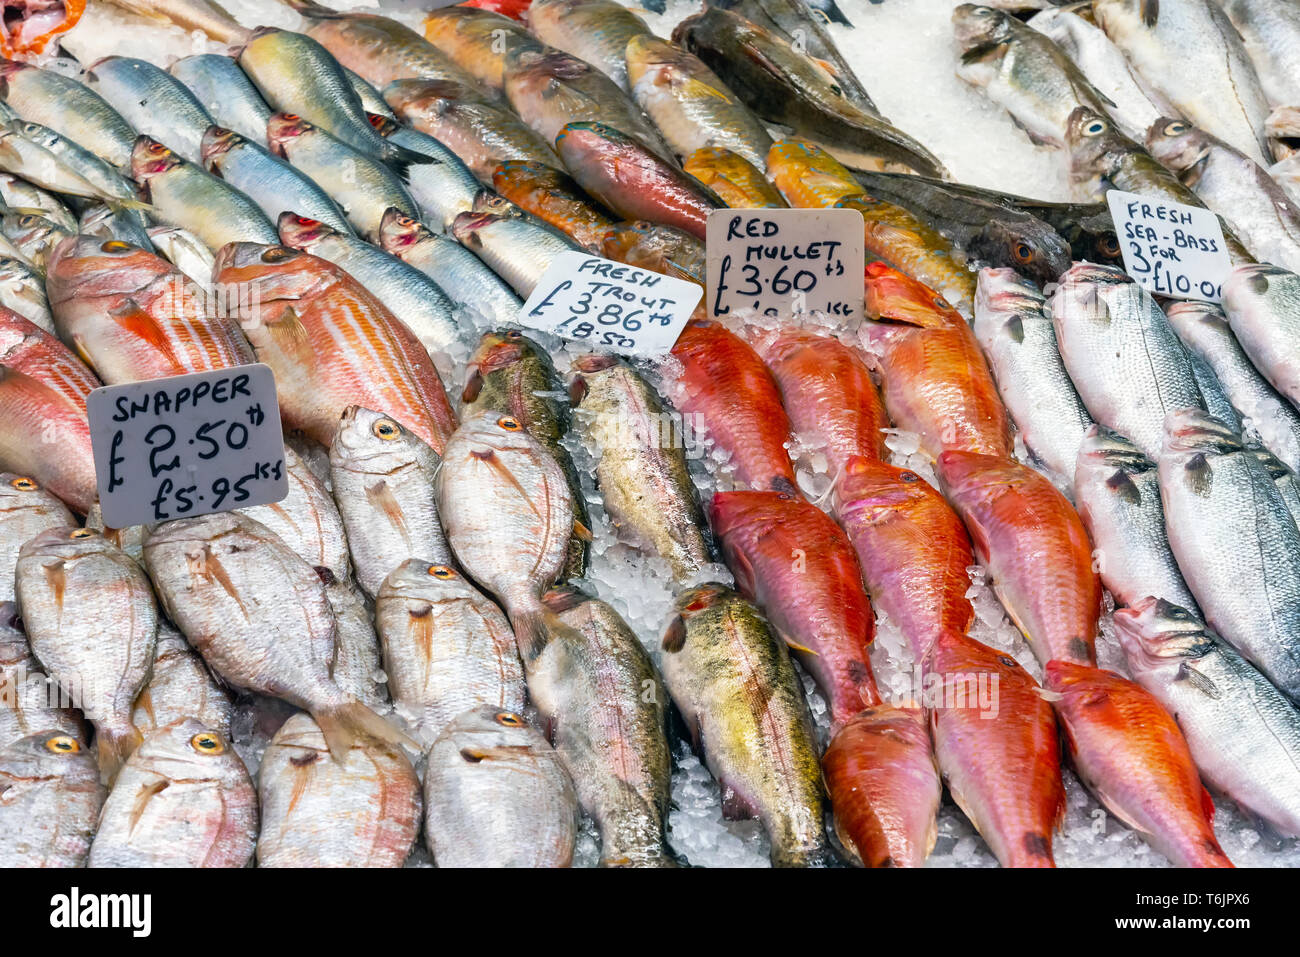 Fresh fish for sale at a market in London, Great Britain Stock Photo